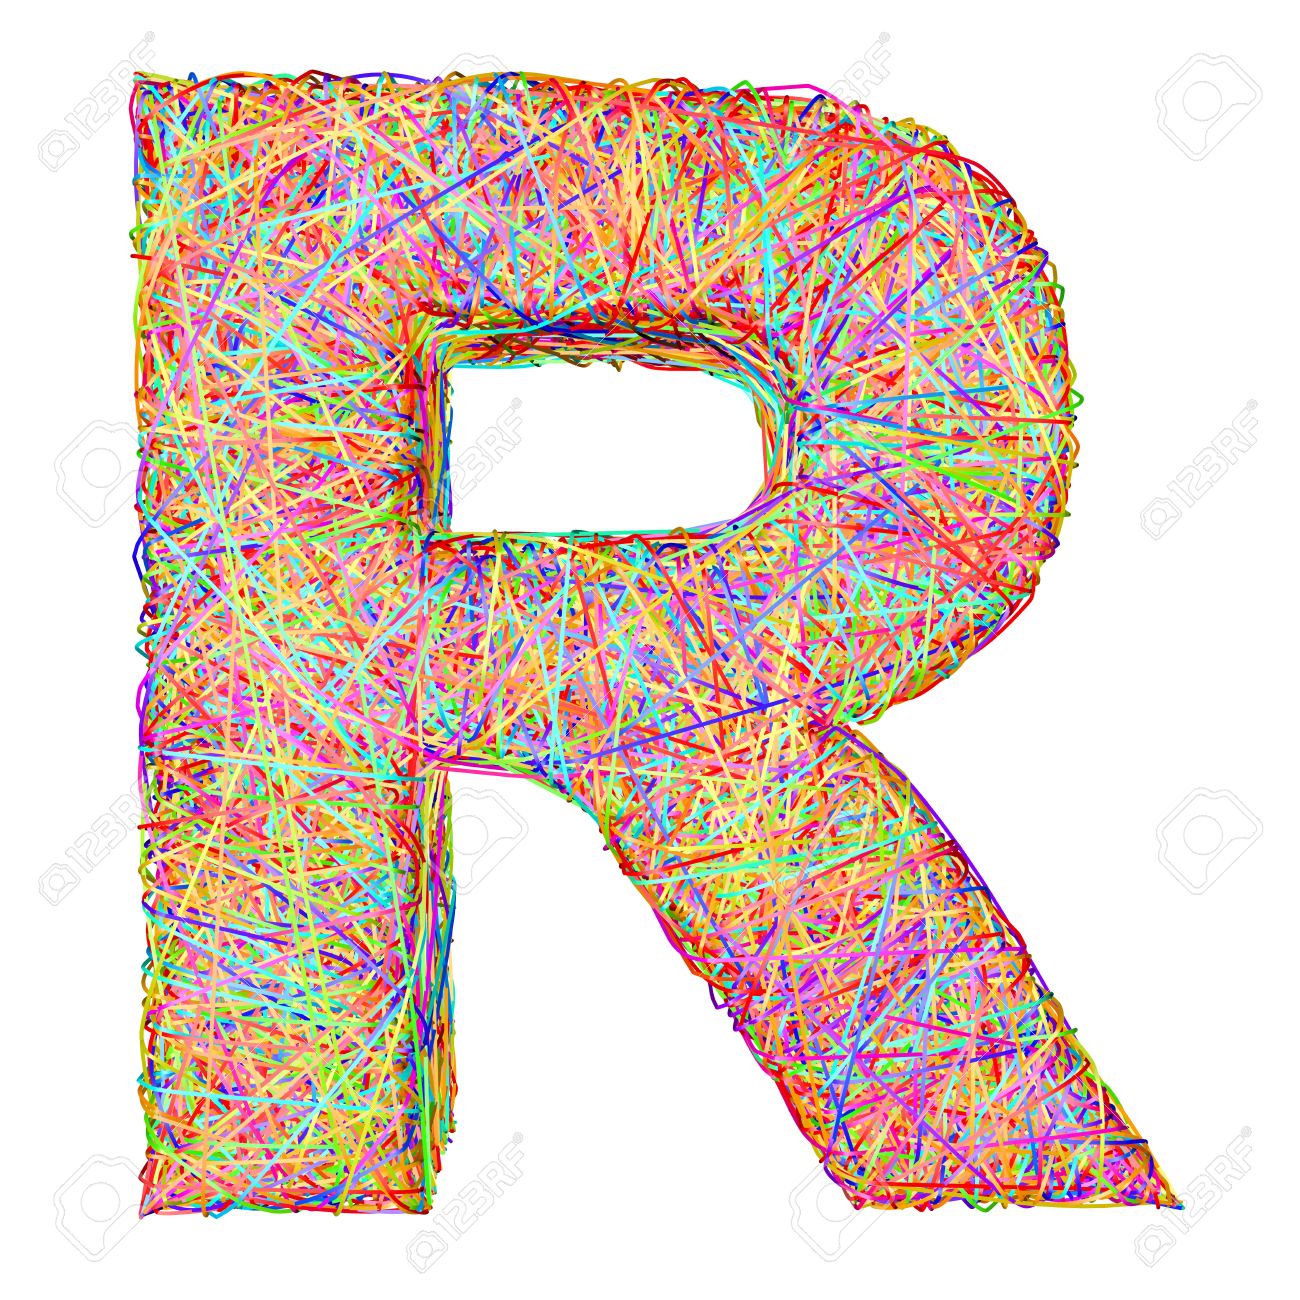 Alphabet symbol letter R composed of colorful striplines isolated on white. High resolution 3D image